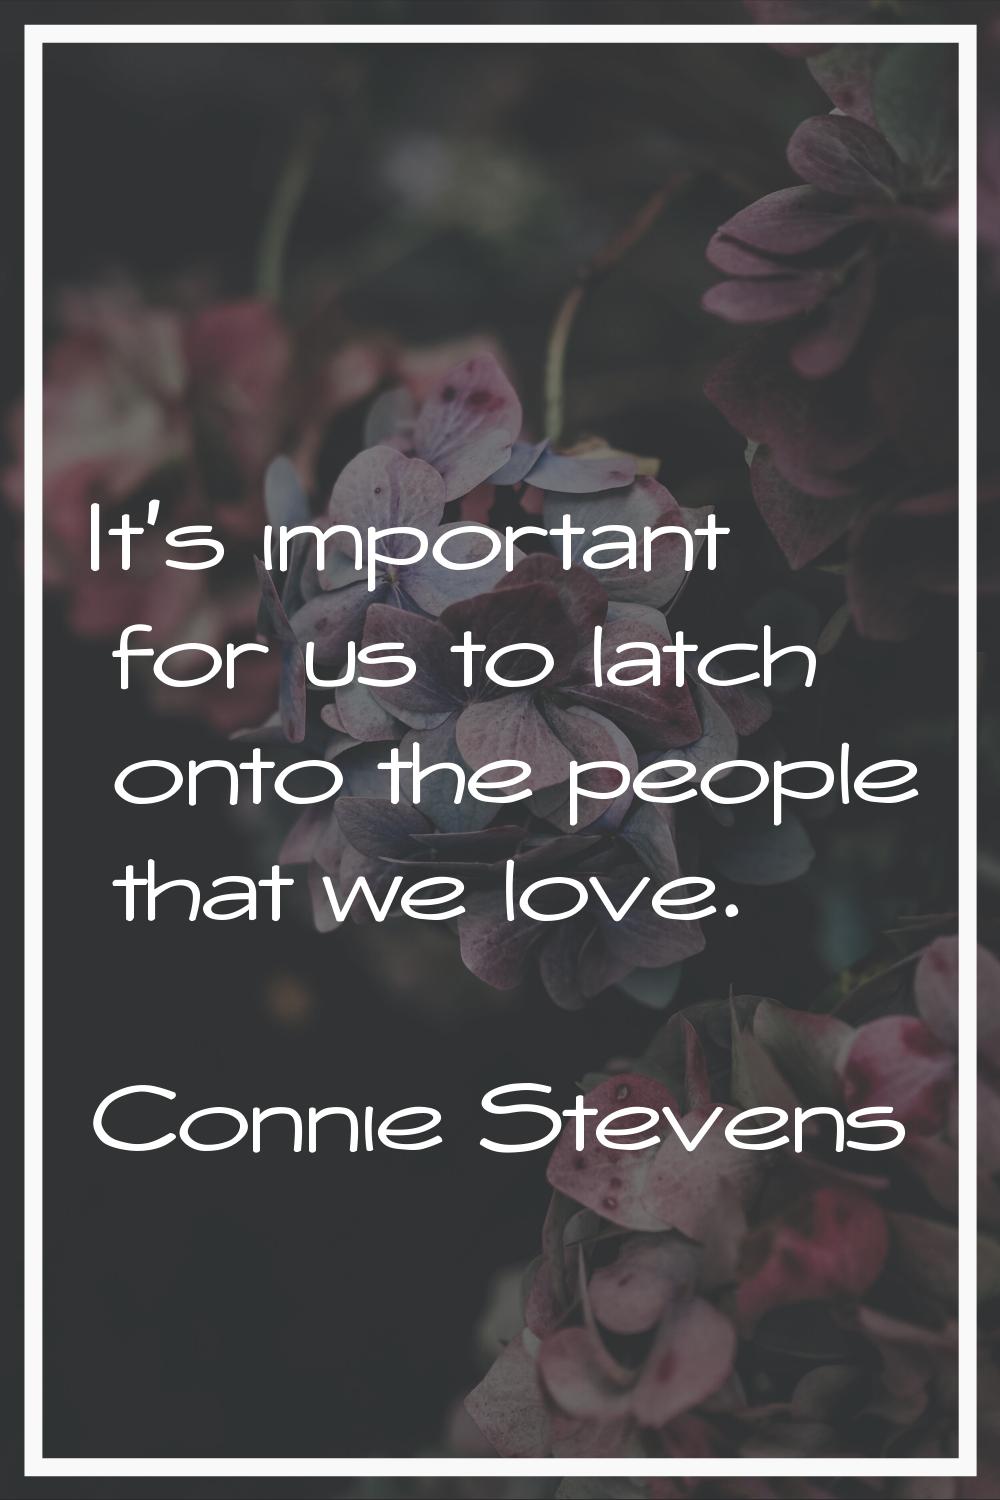 It's important for us to latch onto the people that we love.